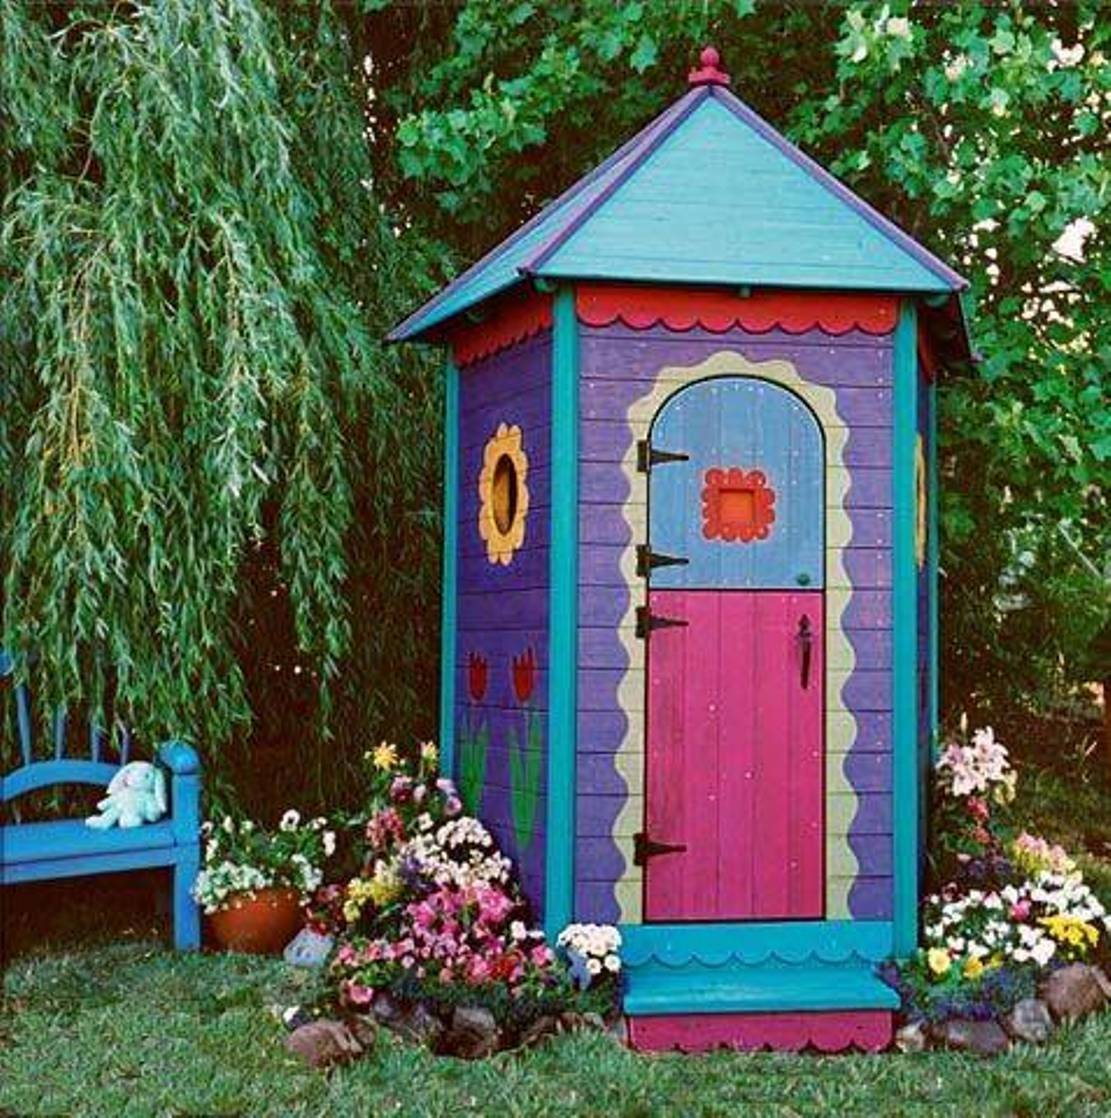 Whimsical Charming Gardens Shed